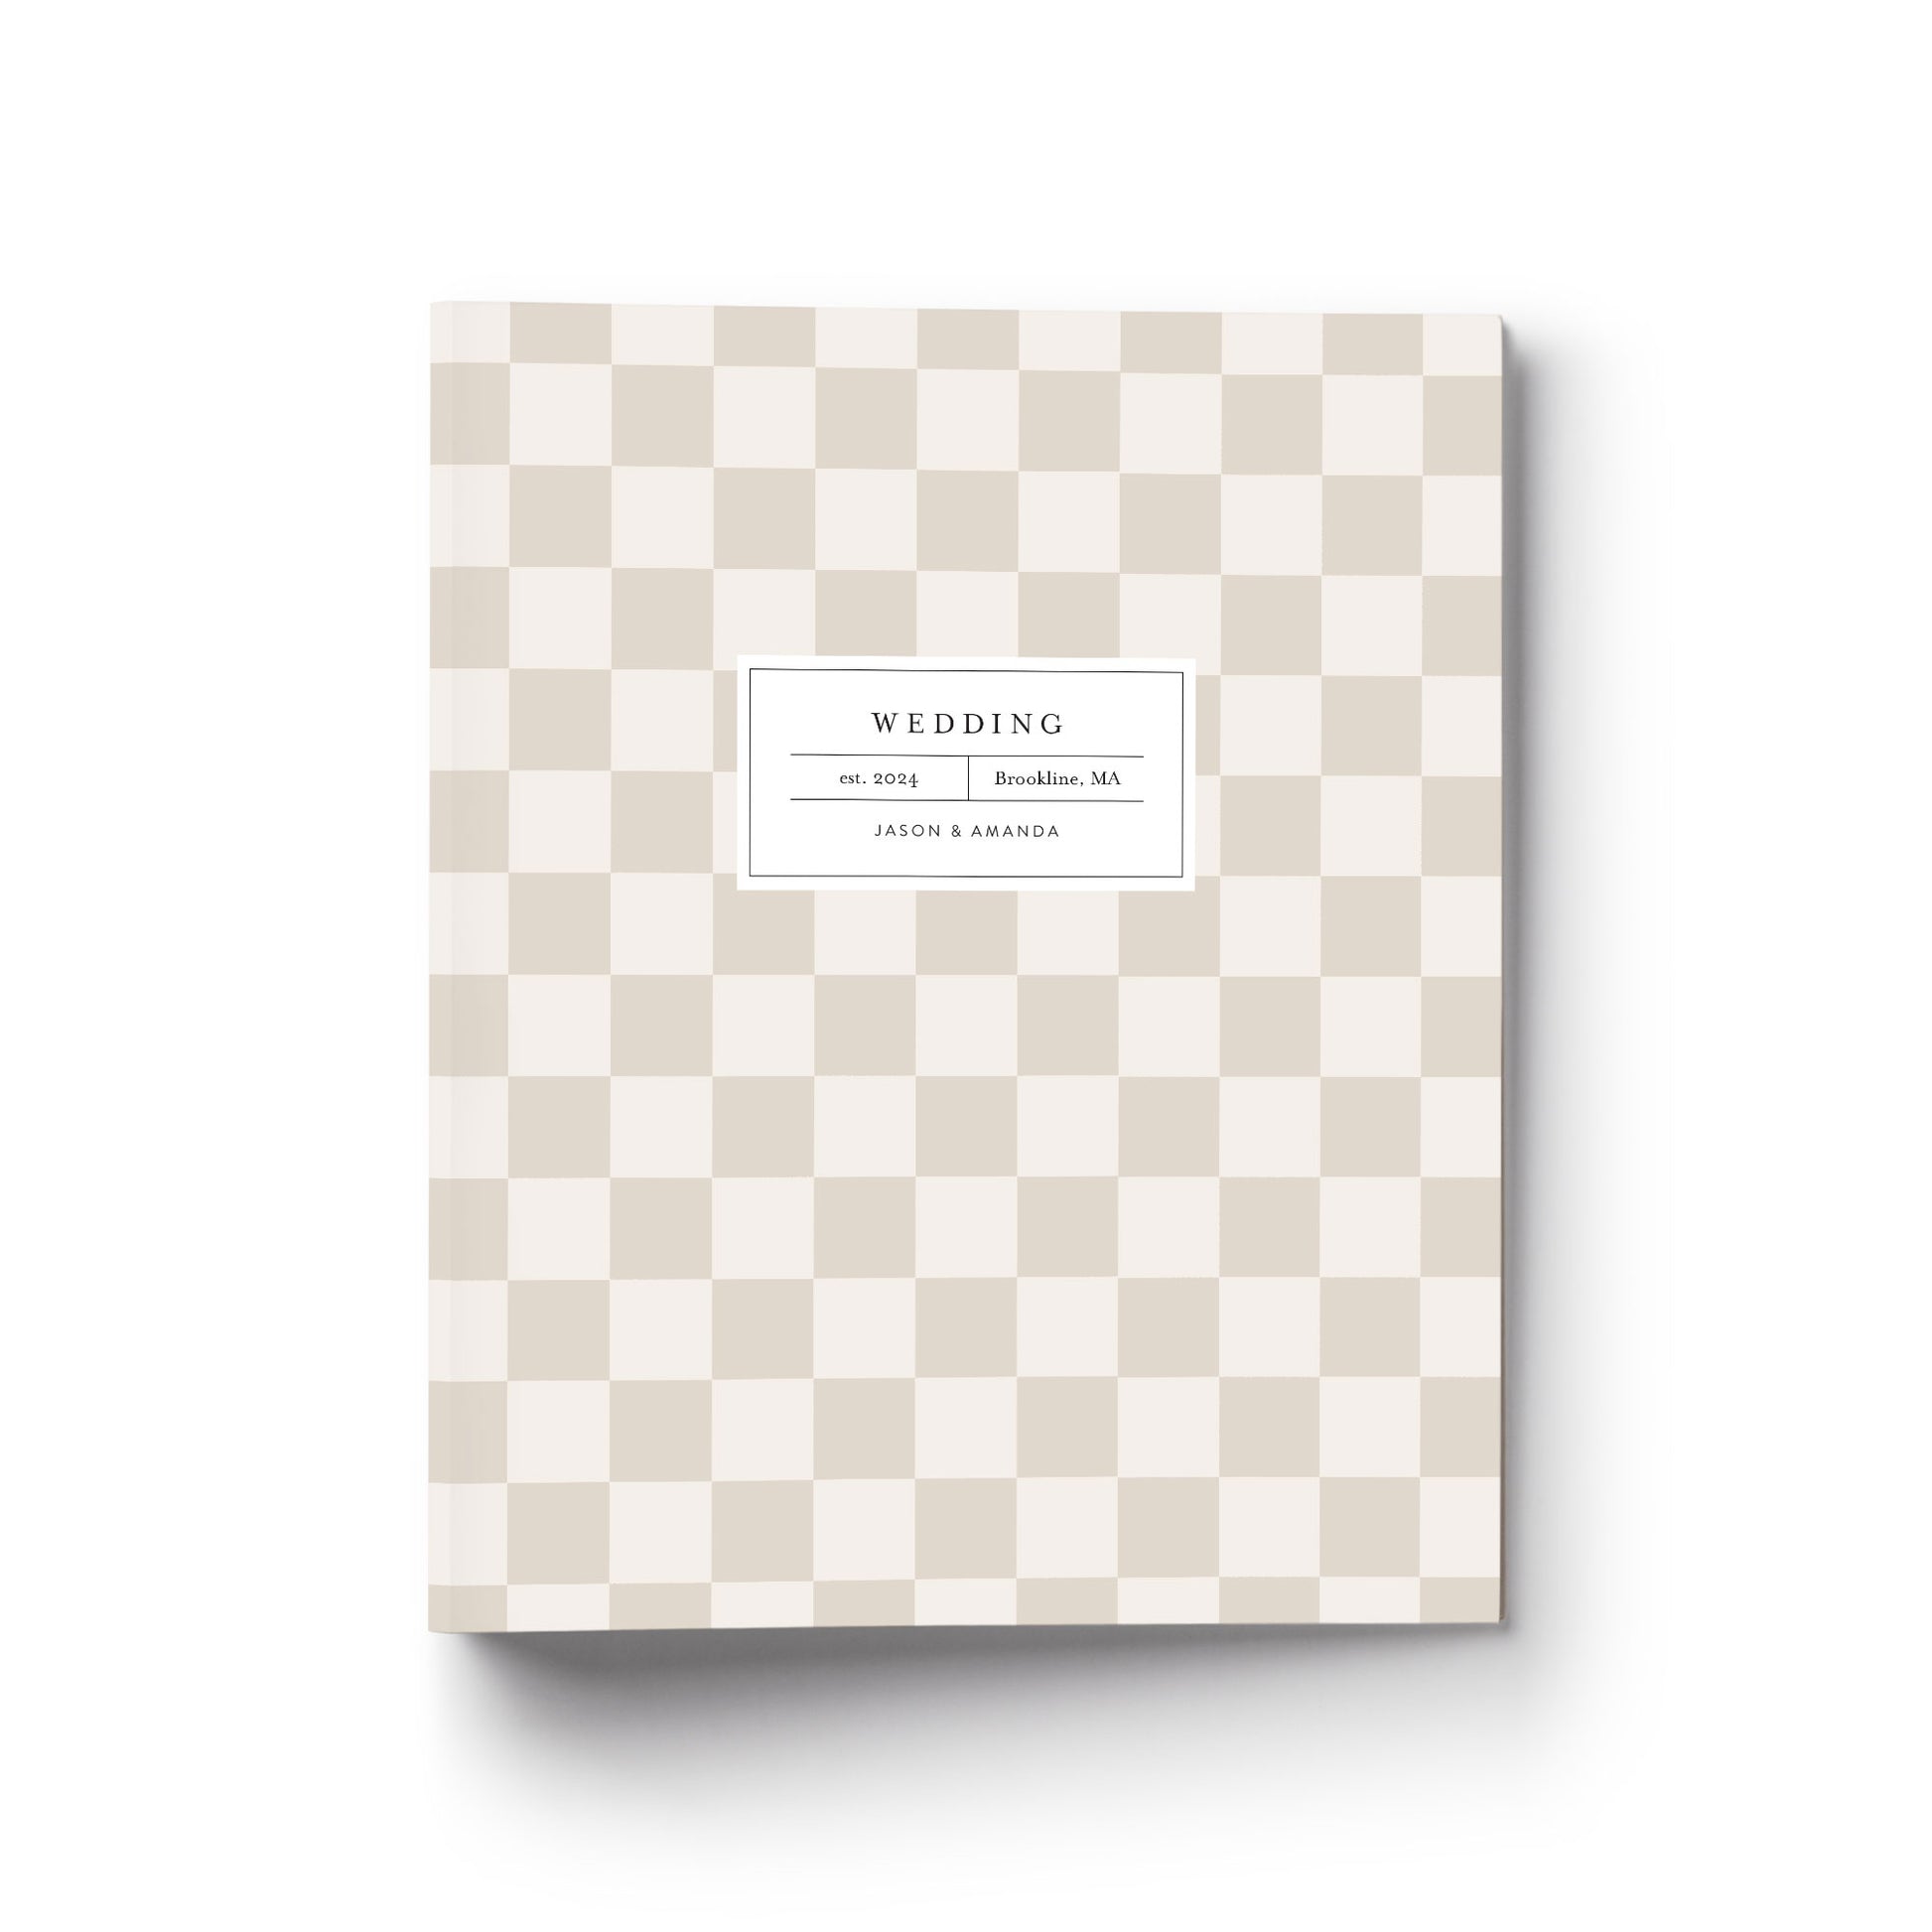 Our wedding binders are the perfect planning tool, shown in a trendy checkerboard pattern